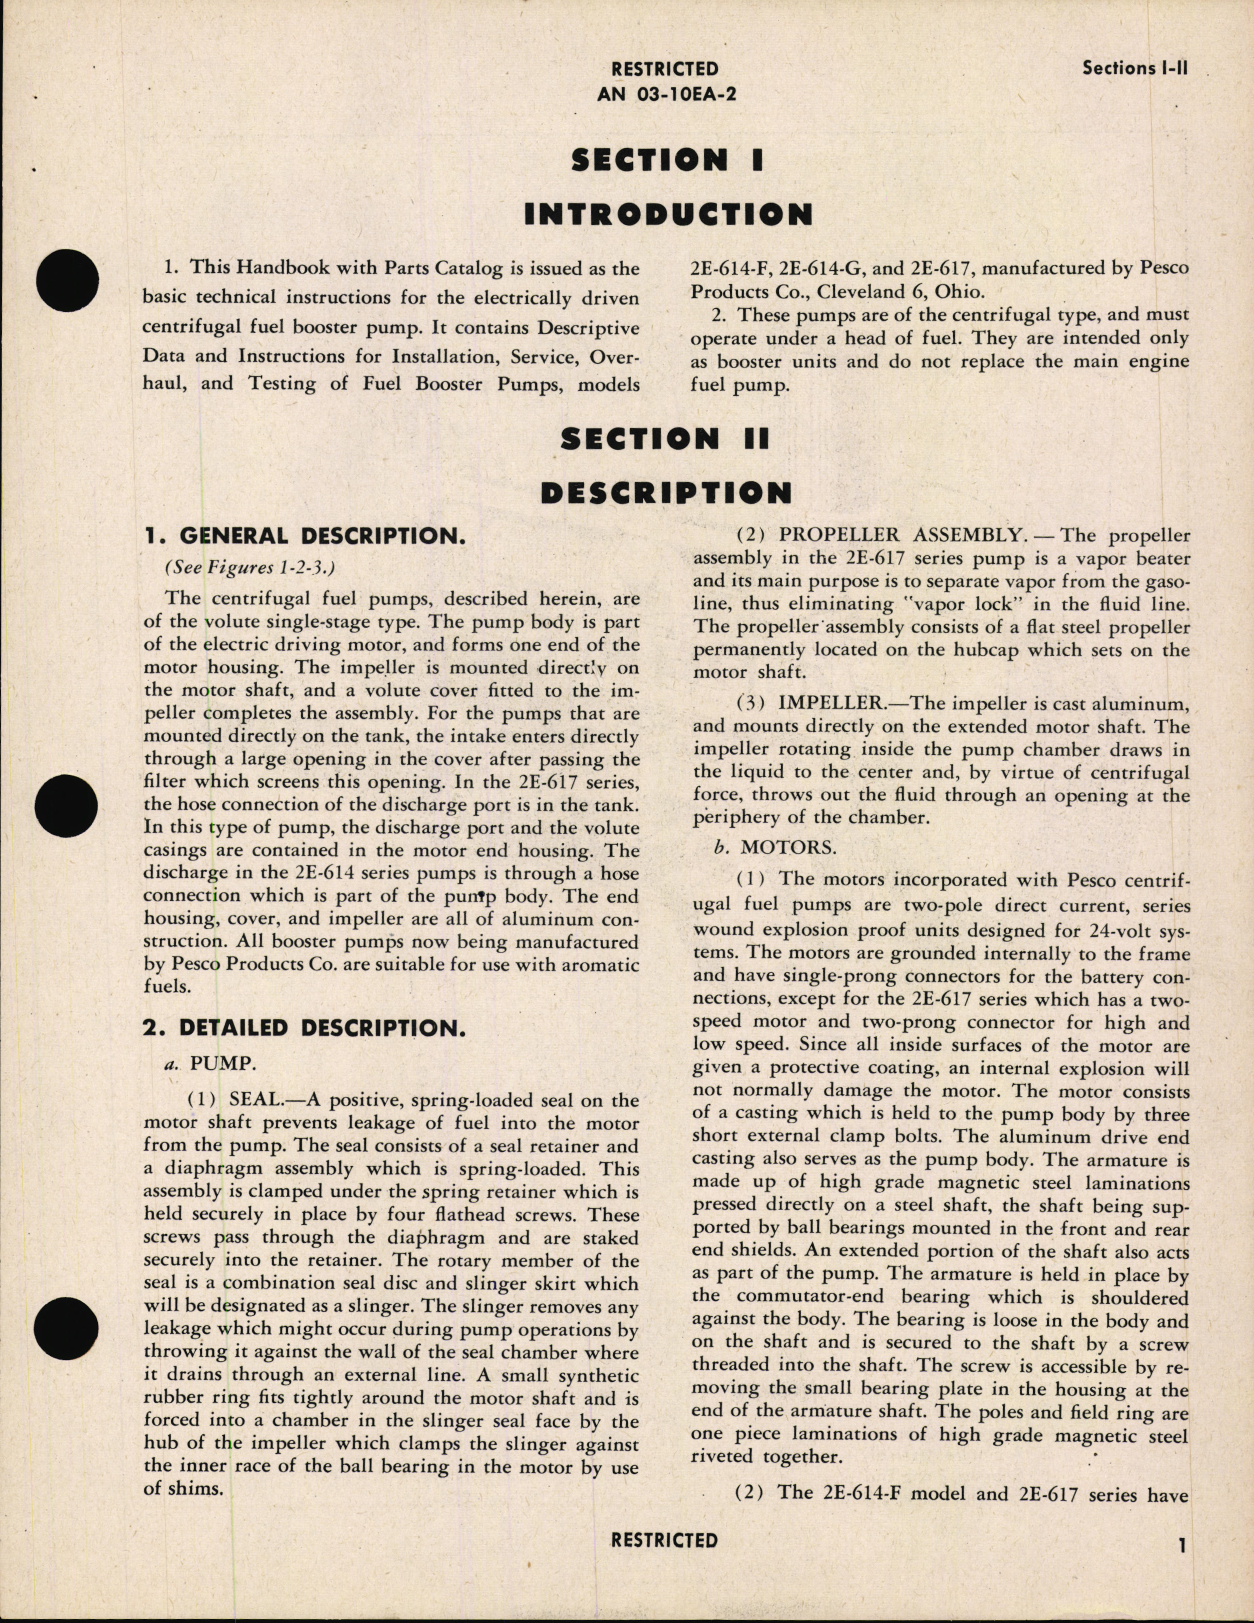 Sample page 5 from AirCorps Library document: Operation, Service, & Overhaul Instructions with Parts Catalog for Fuel Booster Pumps